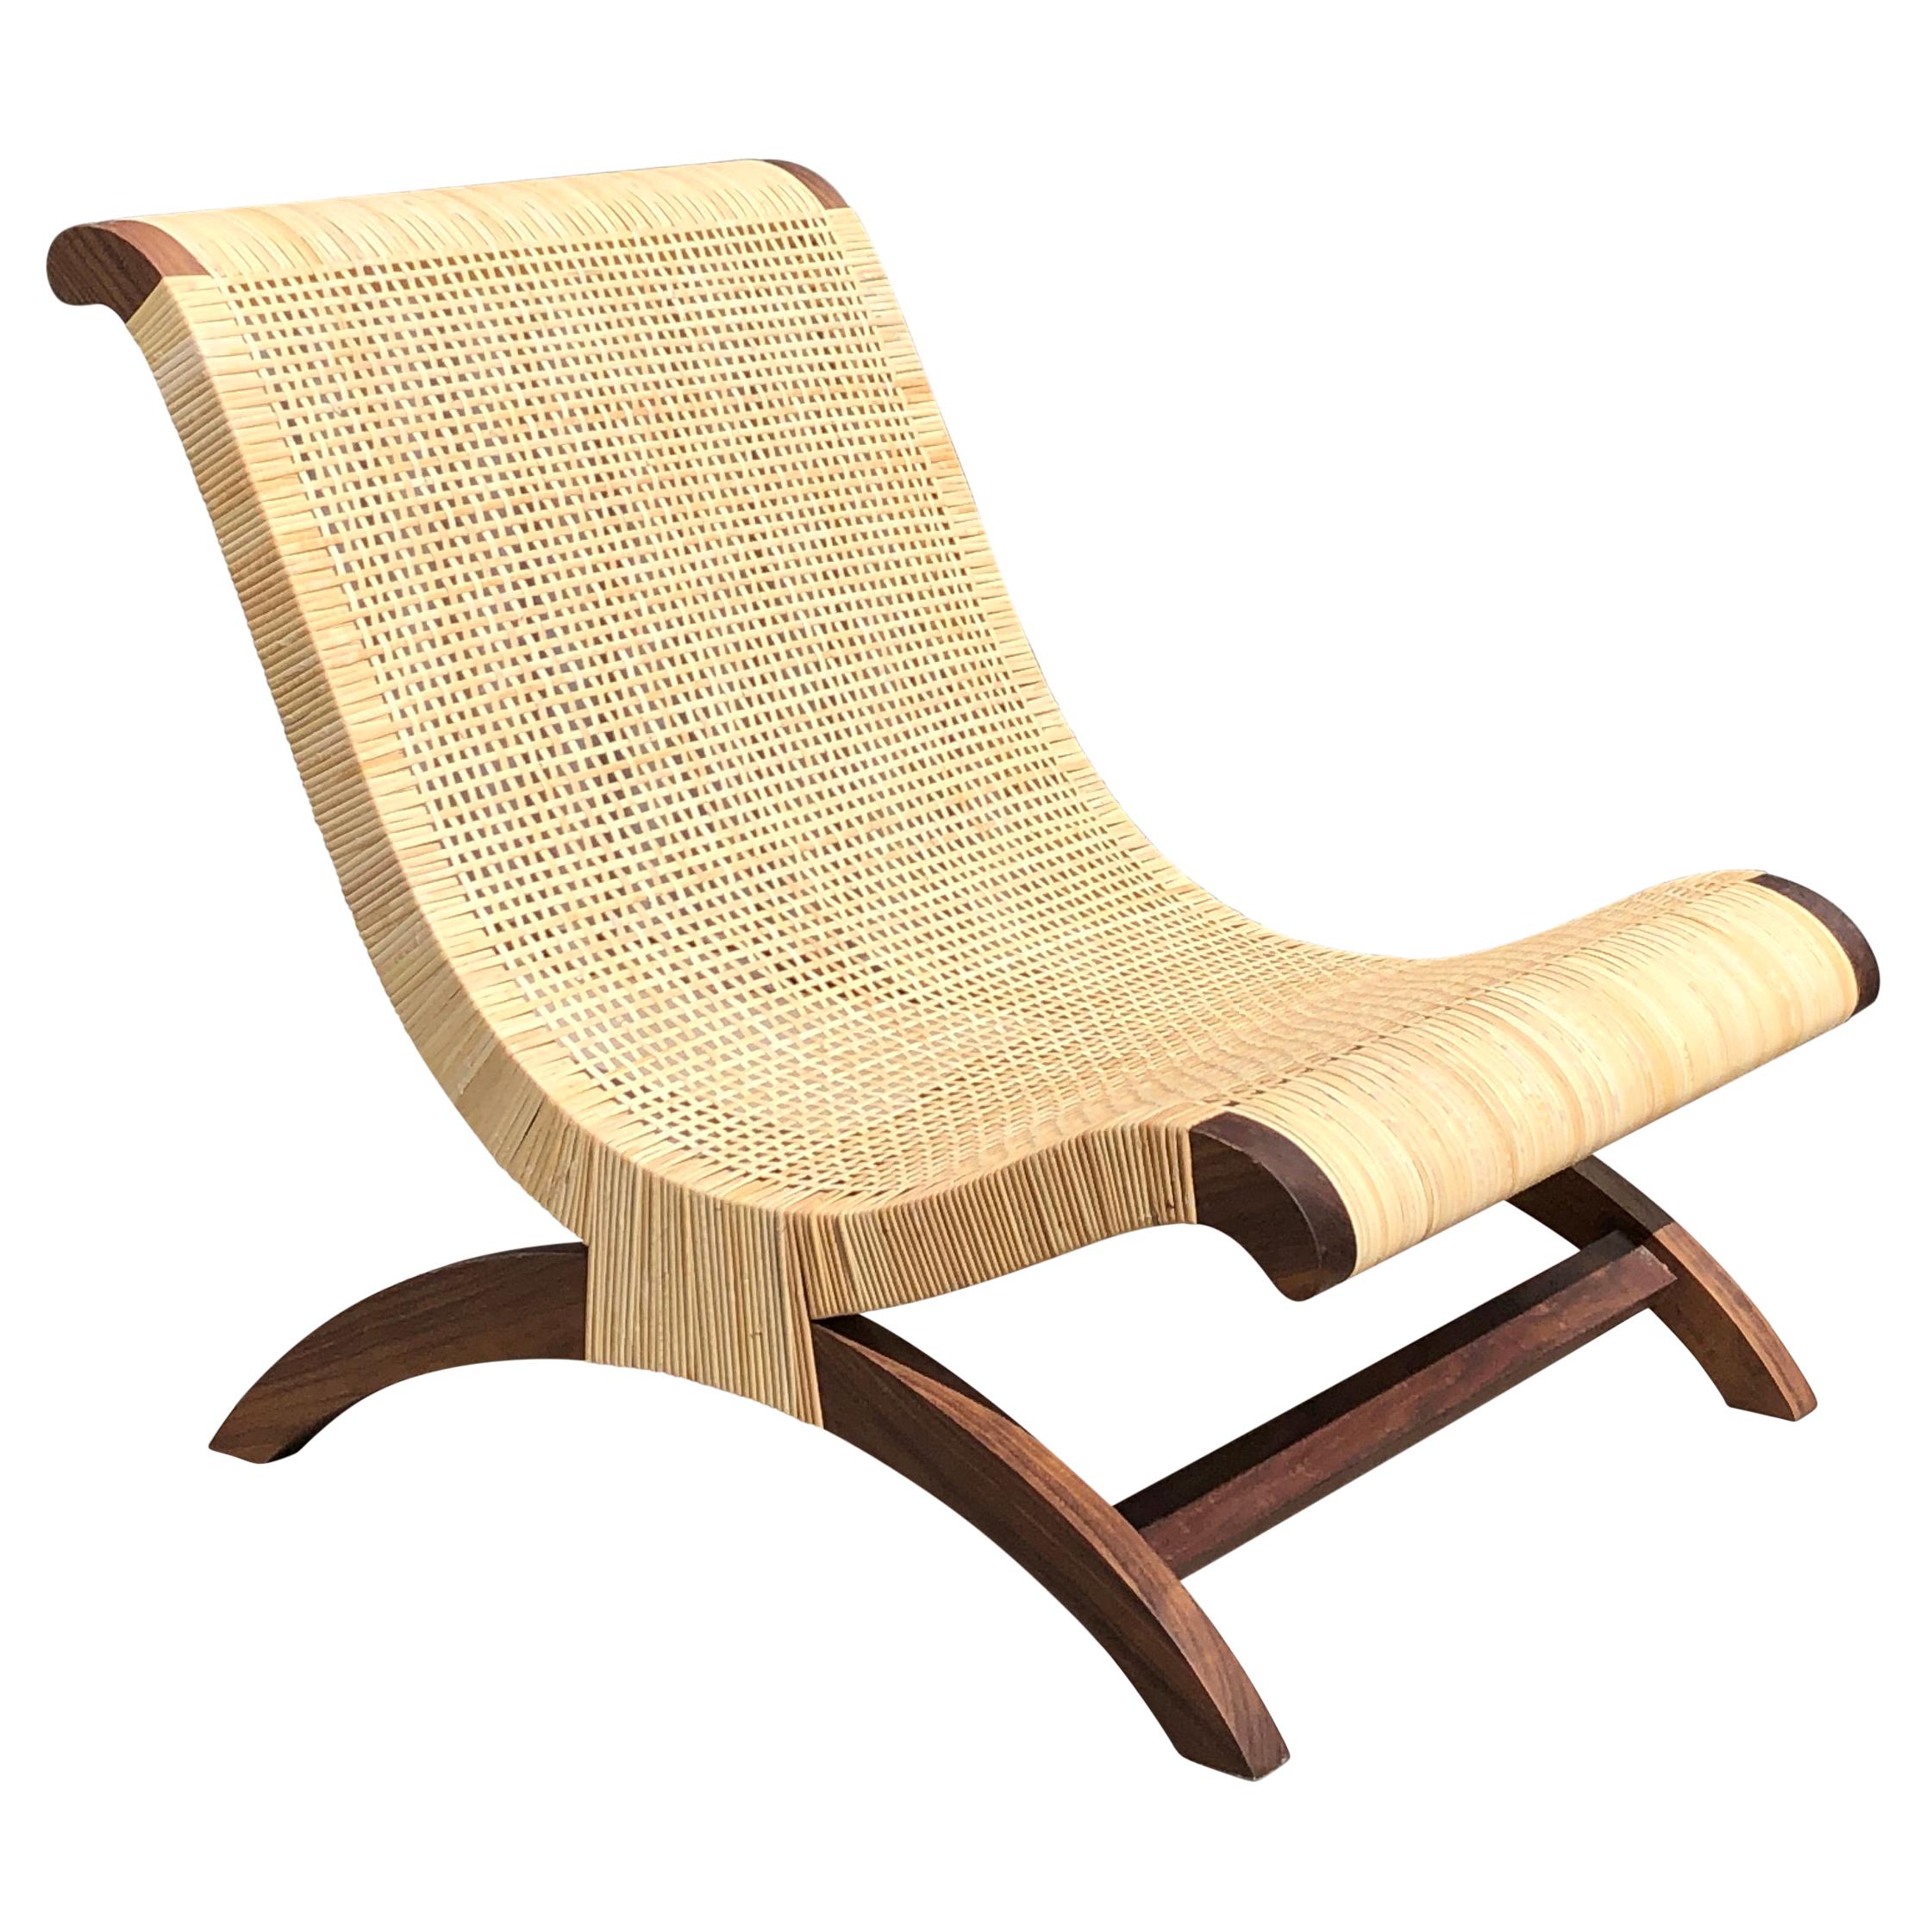 Clara Porset's wood and rattan Mexican Butaque Chair by Luteca